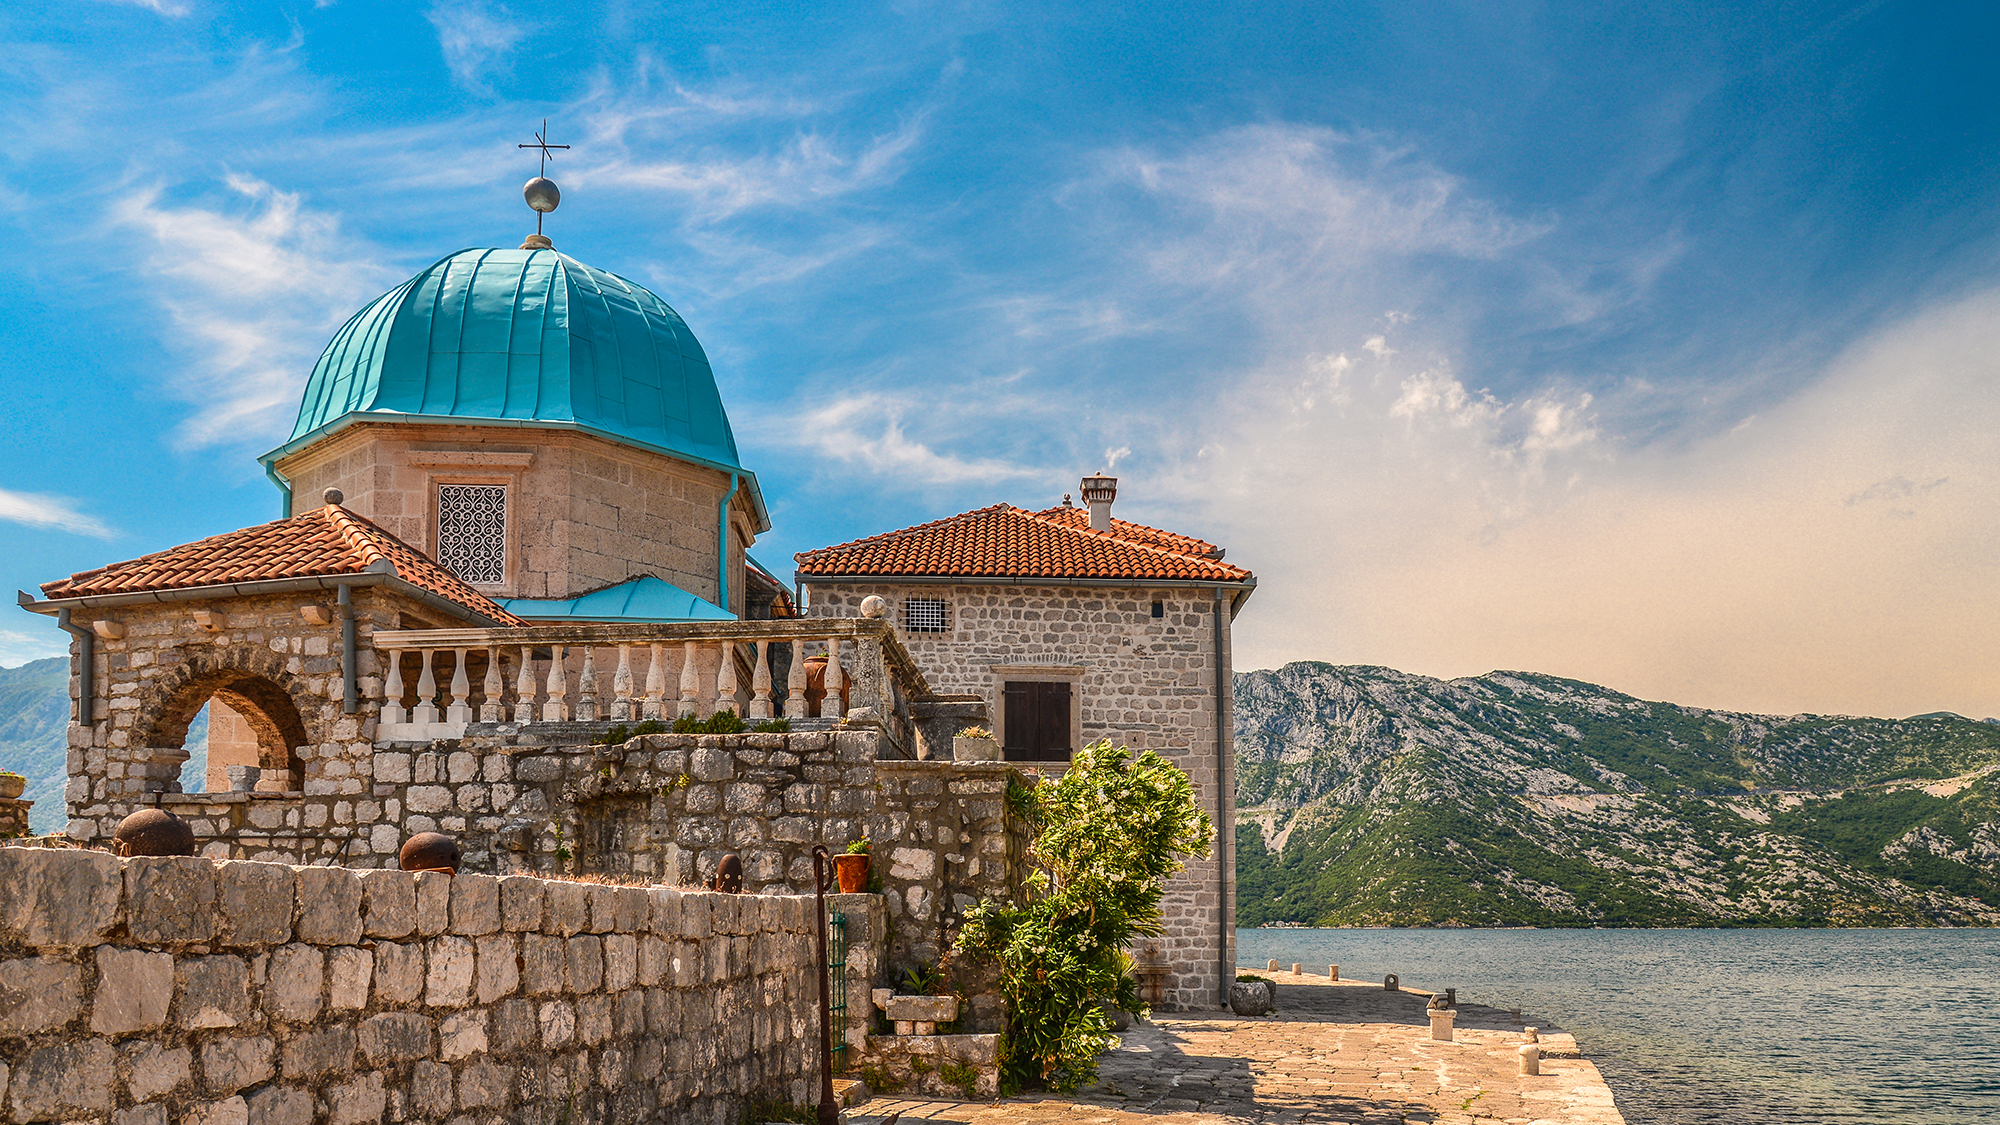 Our Lady of the Rocks Church on the Island near Perast in the Bay of Kotor, Montenegro